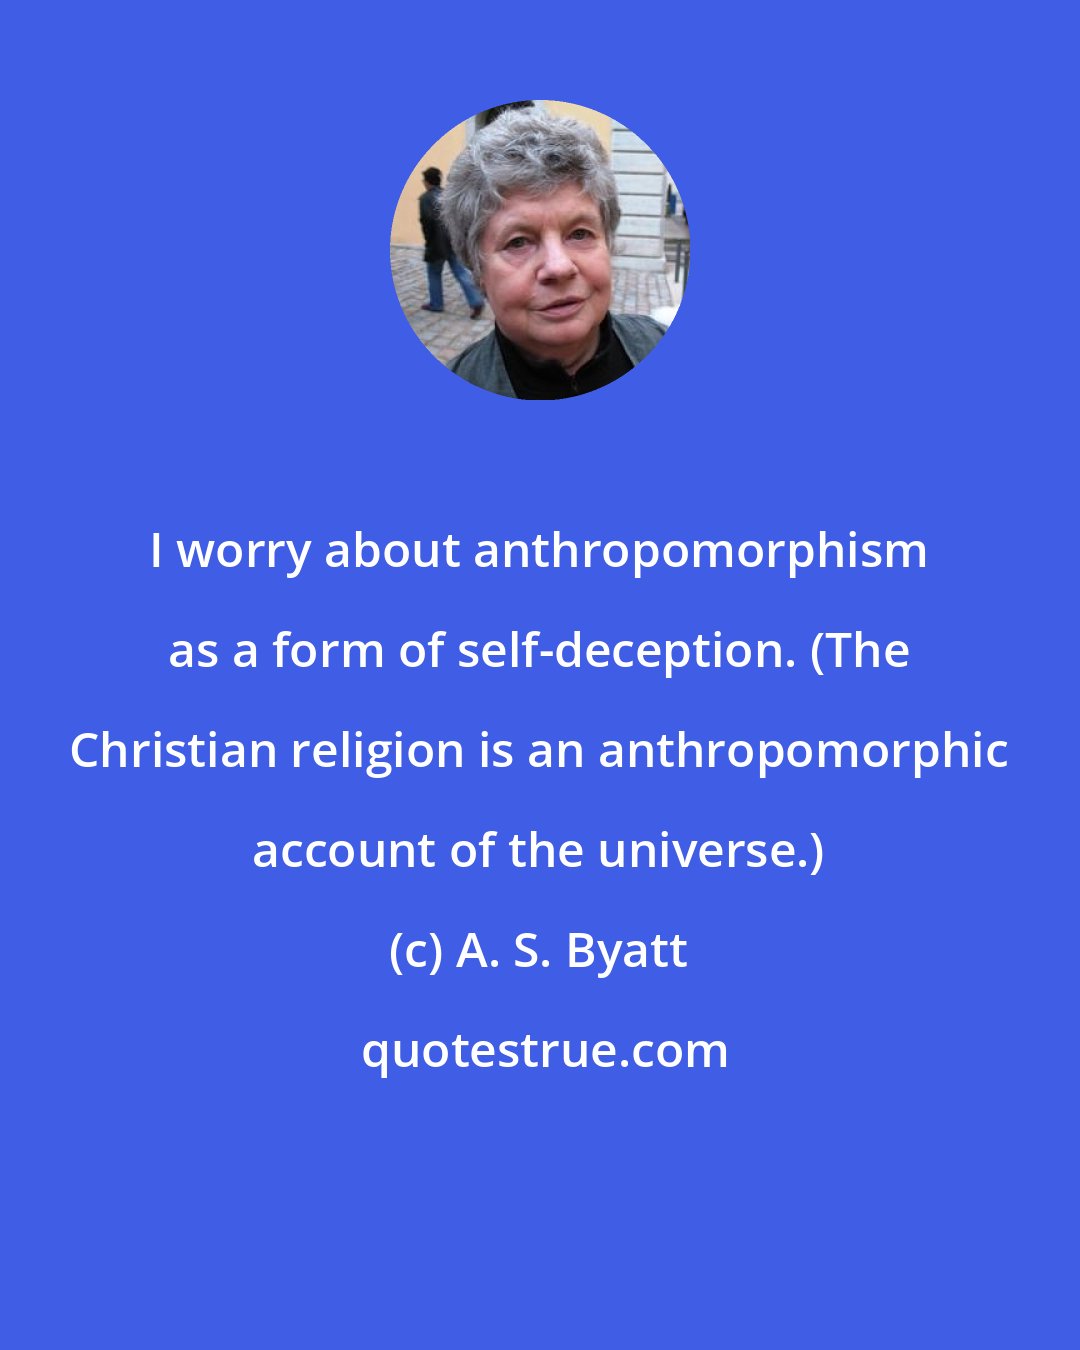 A. S. Byatt: I worry about anthropomorphism as a form of self-deception. (The Christian religion is an anthropomorphic account of the universe.)